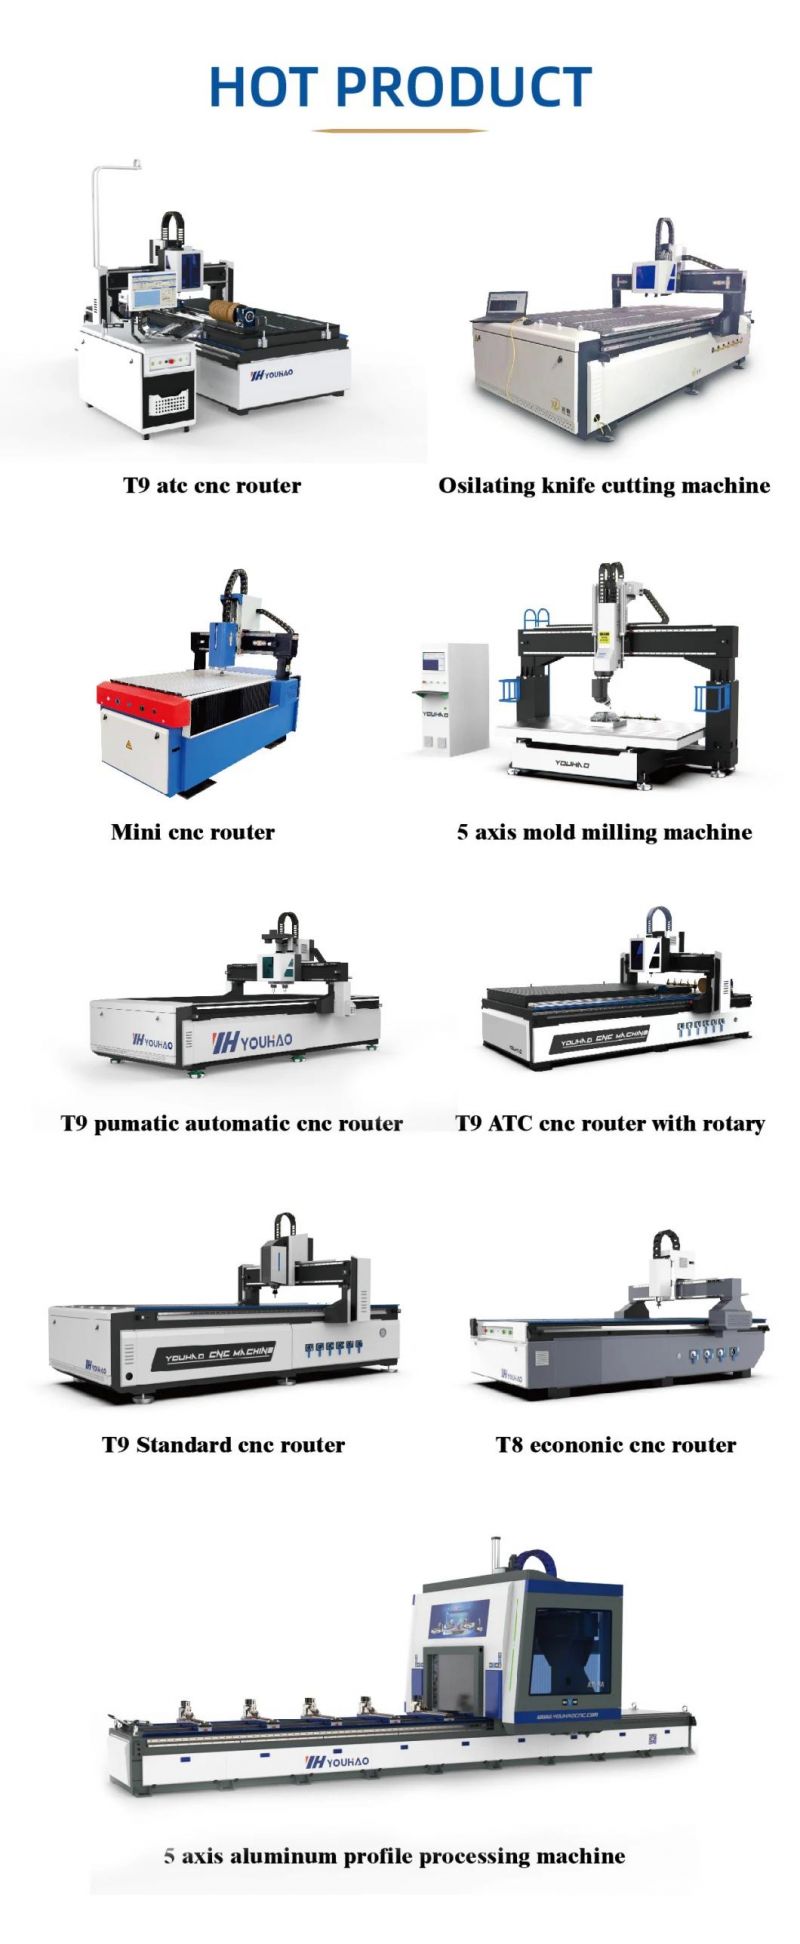 High Productivity 4 Axis CNC Router 1325/2030 180 Degree Swing Head CNC Wood Machinery